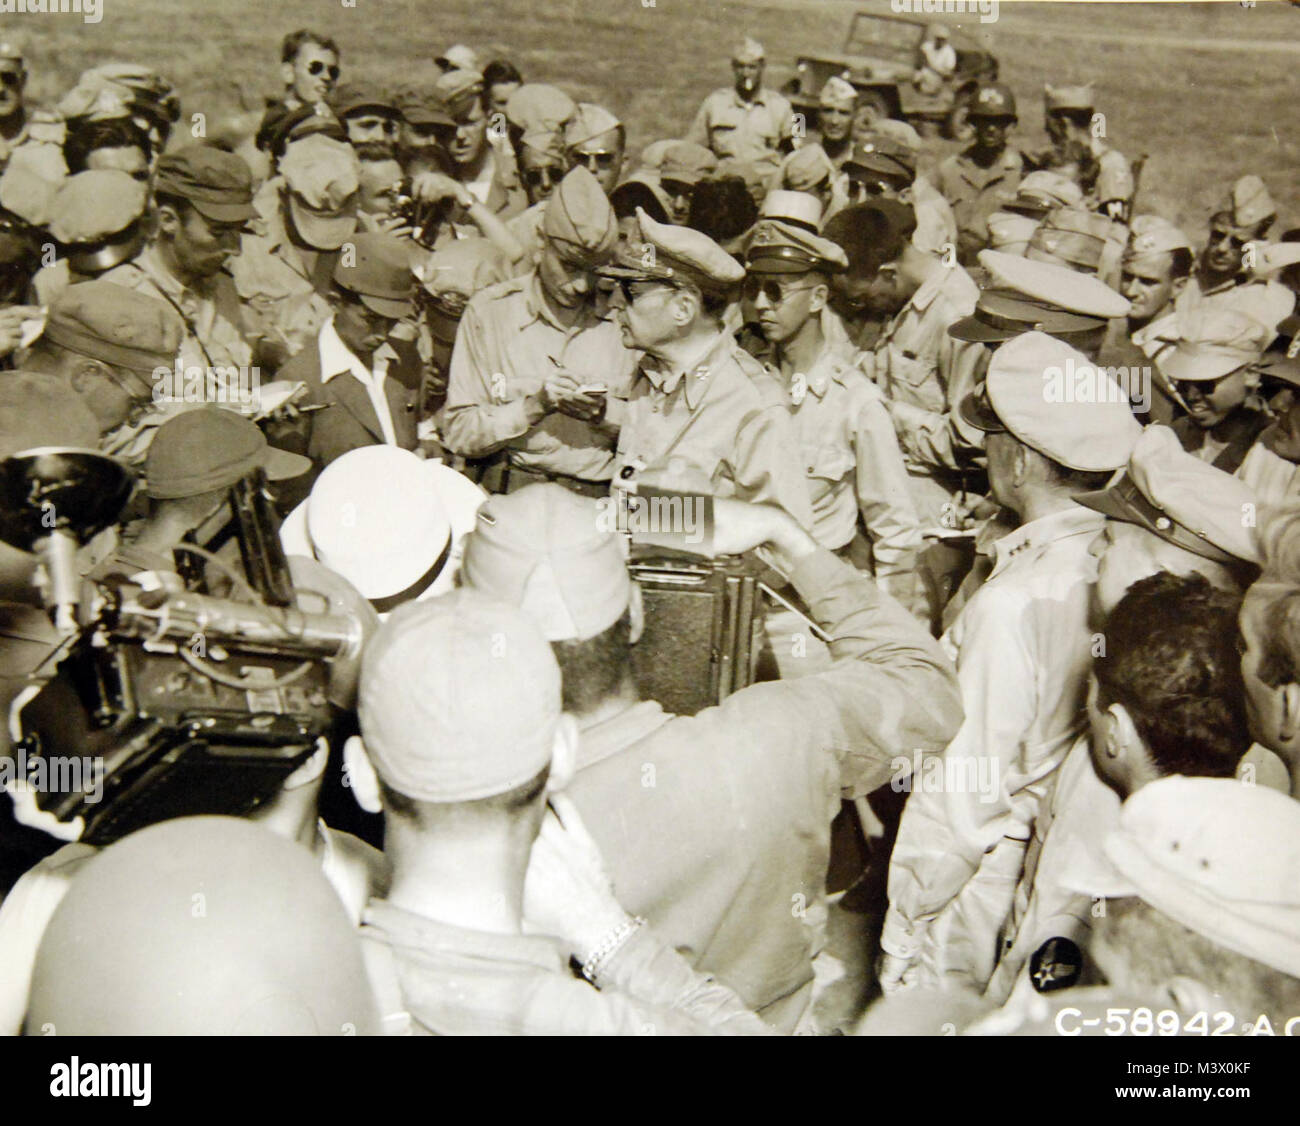 LC-USZ62-98660:  WWII: Japanese Surrender.   General of the Army Douglas A. McArthur arriving at Atsugi, Japan, August 30, 1945.   U.S. Army Photograph: SC-111-A-58942-A.C.   Courtesy of the Library of Congress:  Lot-8997.   (2018/02/02). LC-USZ62-98660 39146744465 o Stock Photo